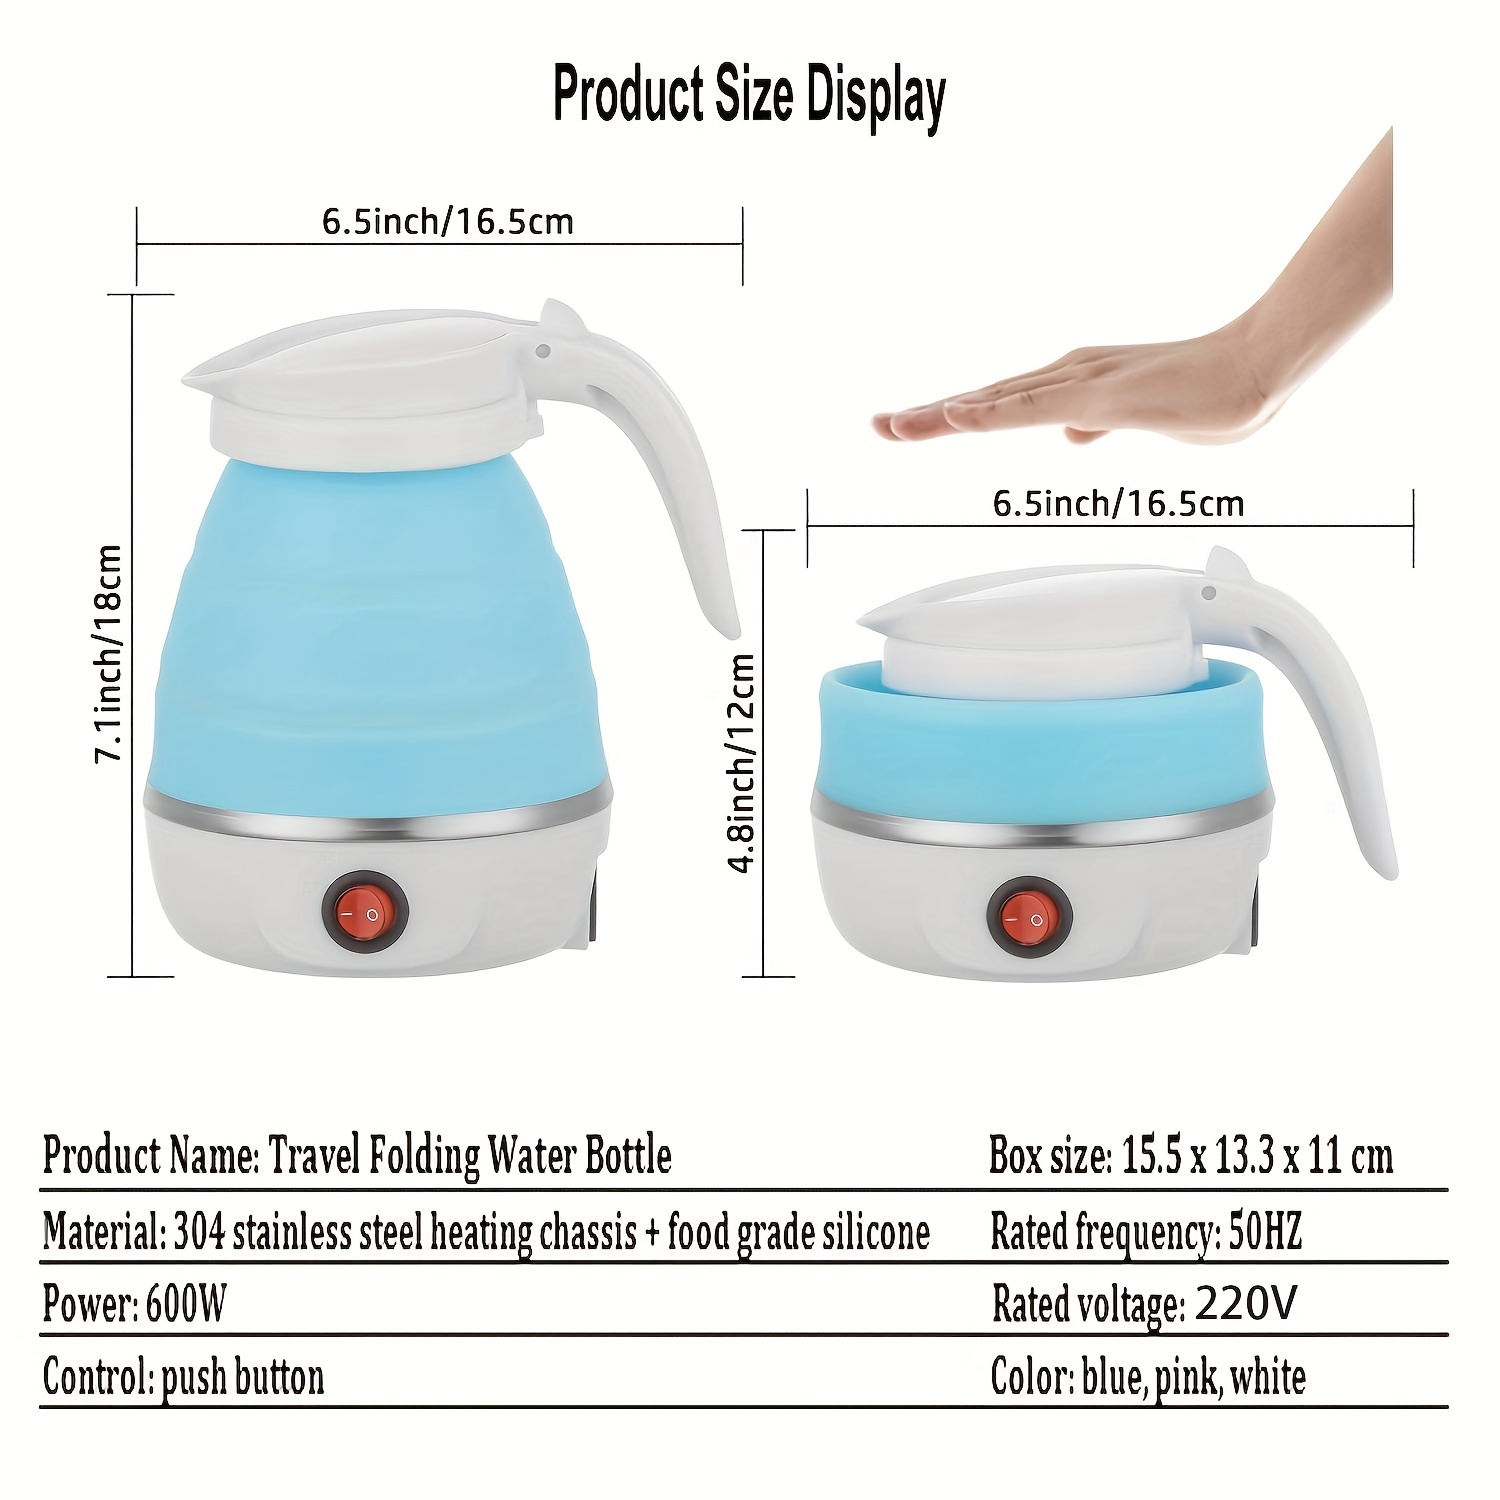 2-Cup Foldable Electric Kettle Collapsible Travel Kettle with Separable  Power Cord, Blue